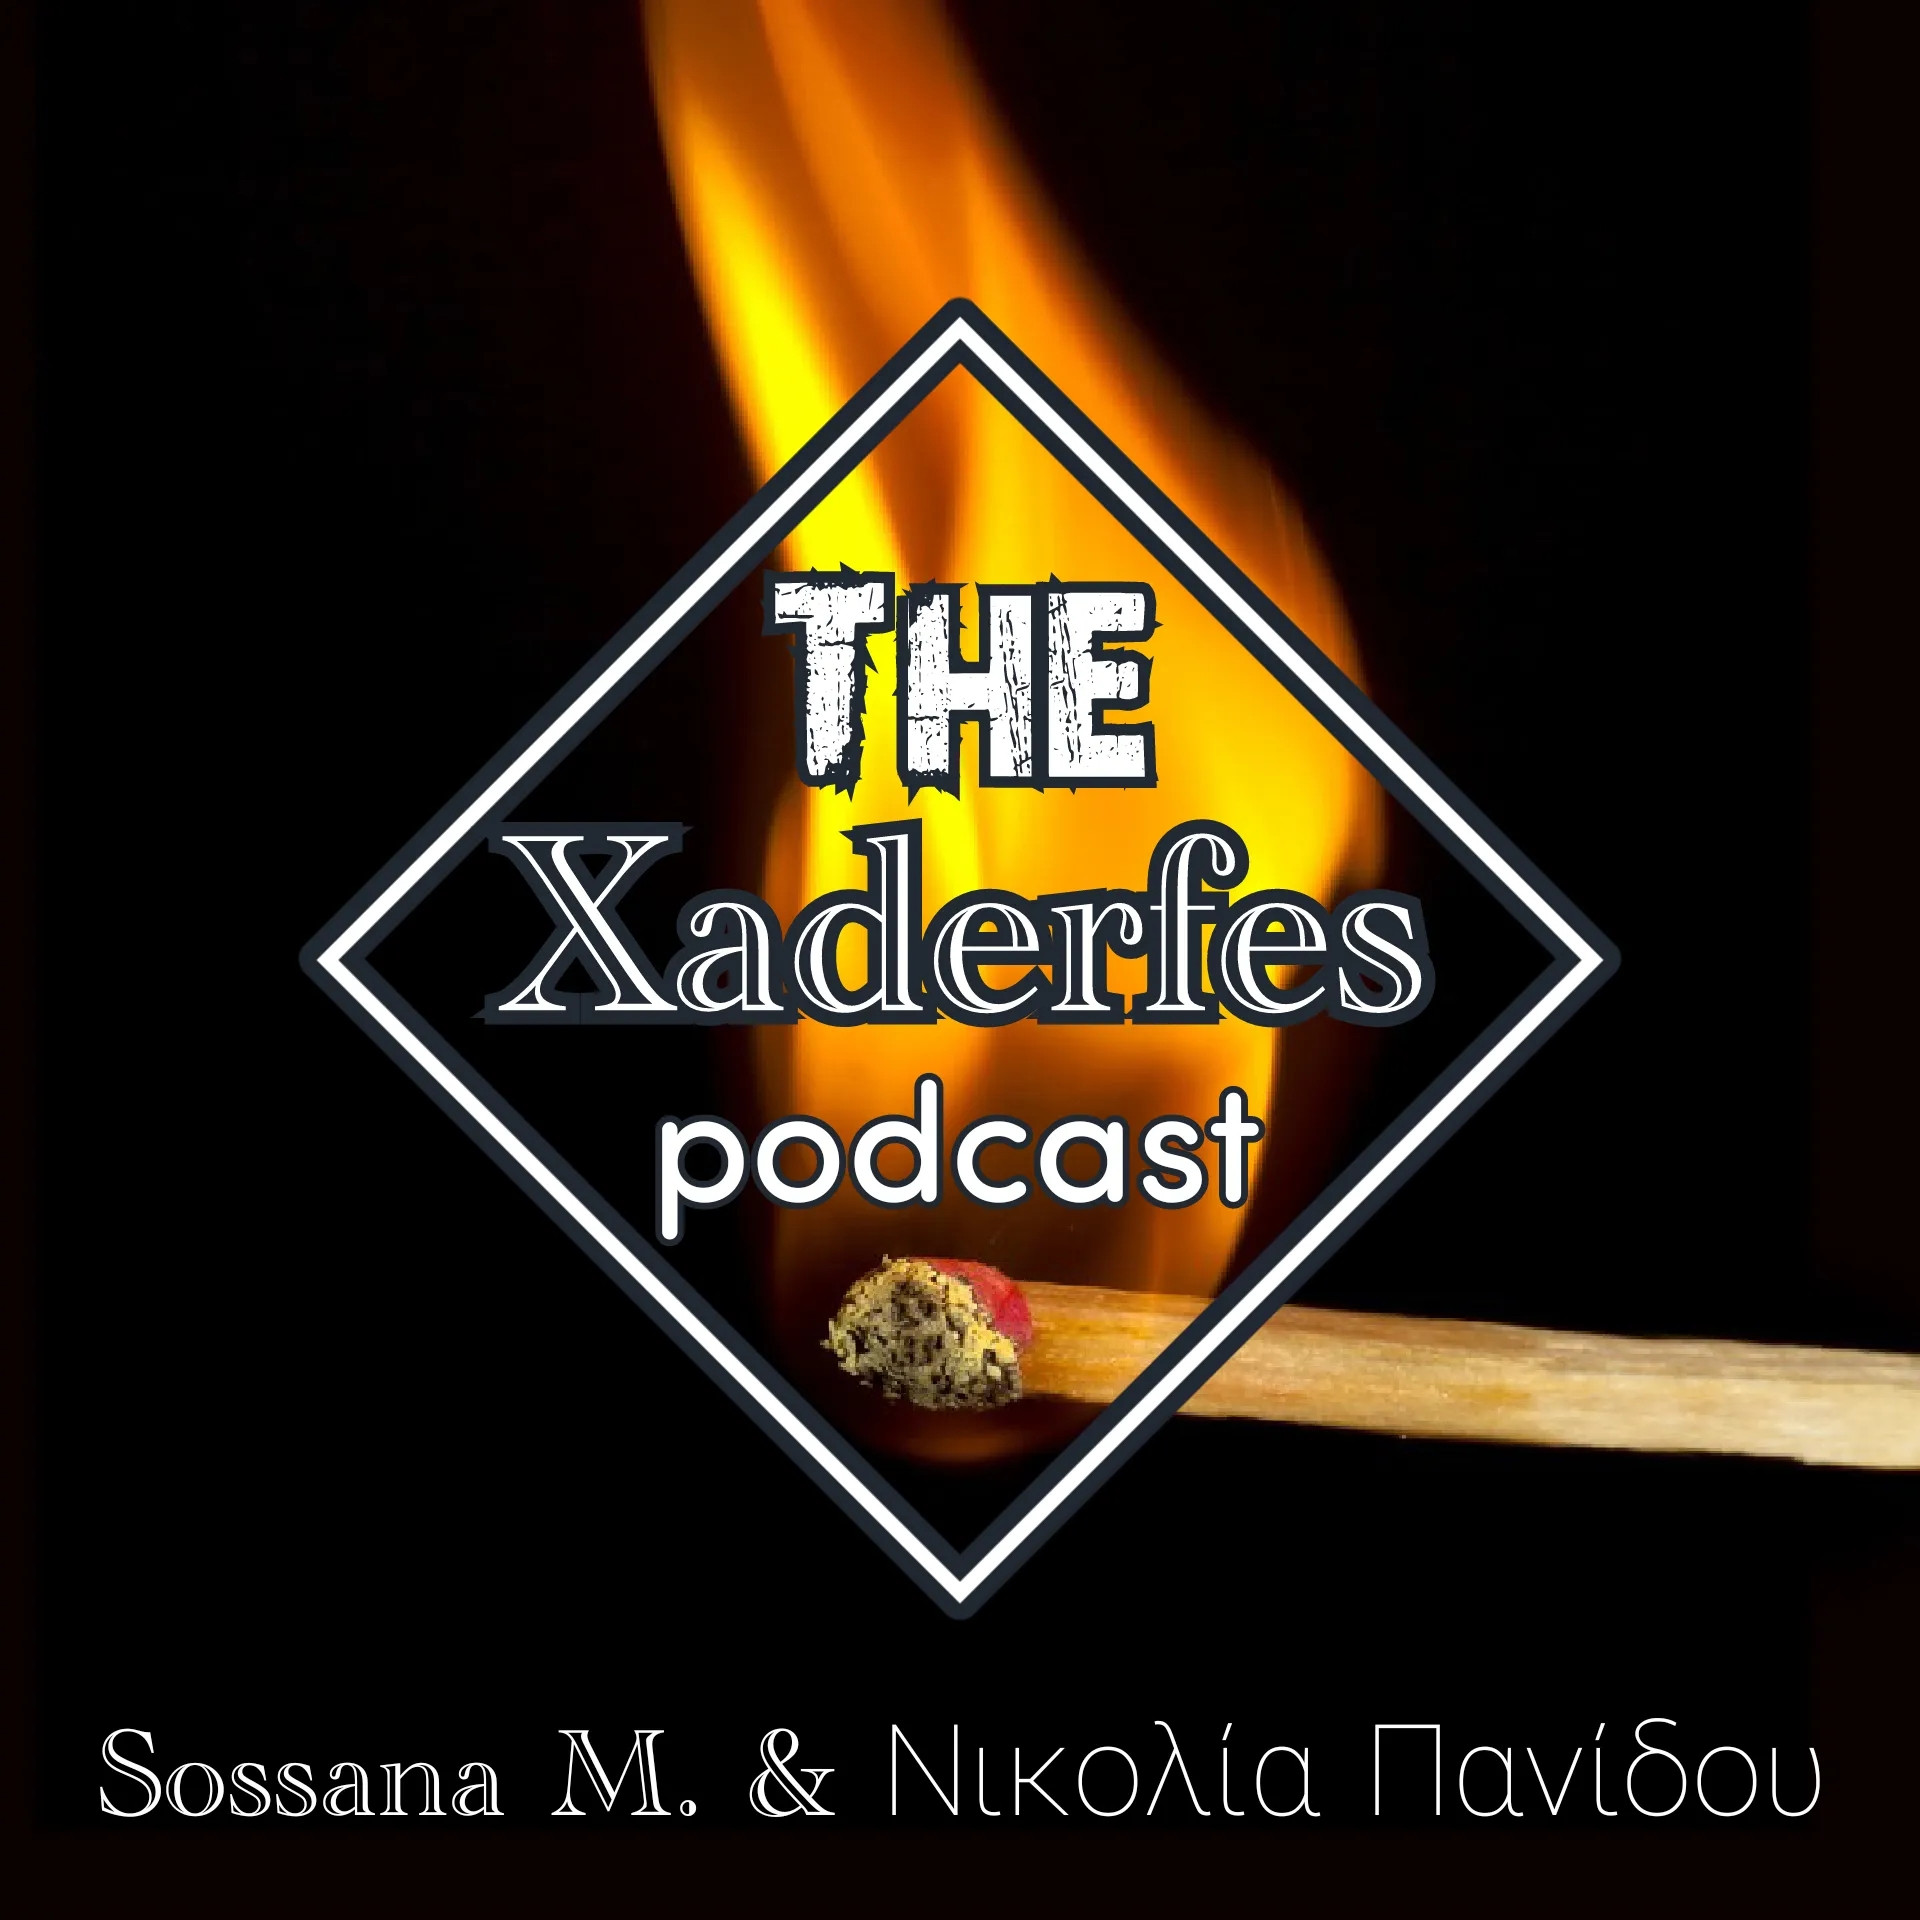 The Xaderfes Podcast